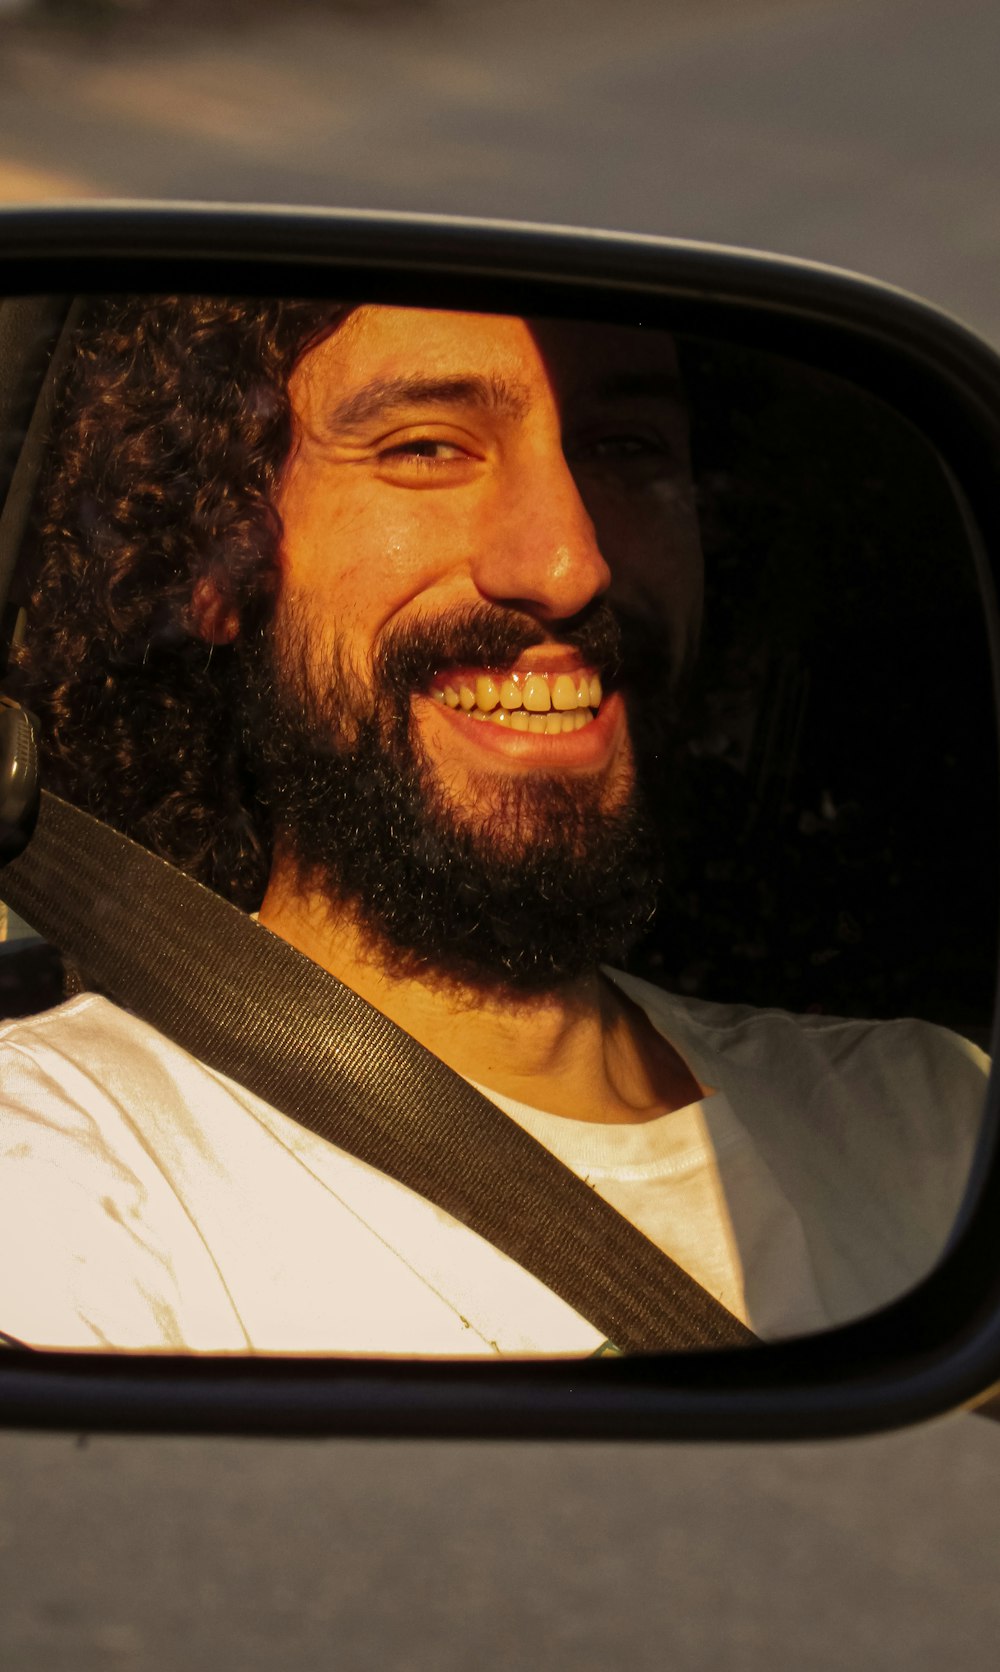 a man with long hair and a beard smiling in a car mirror